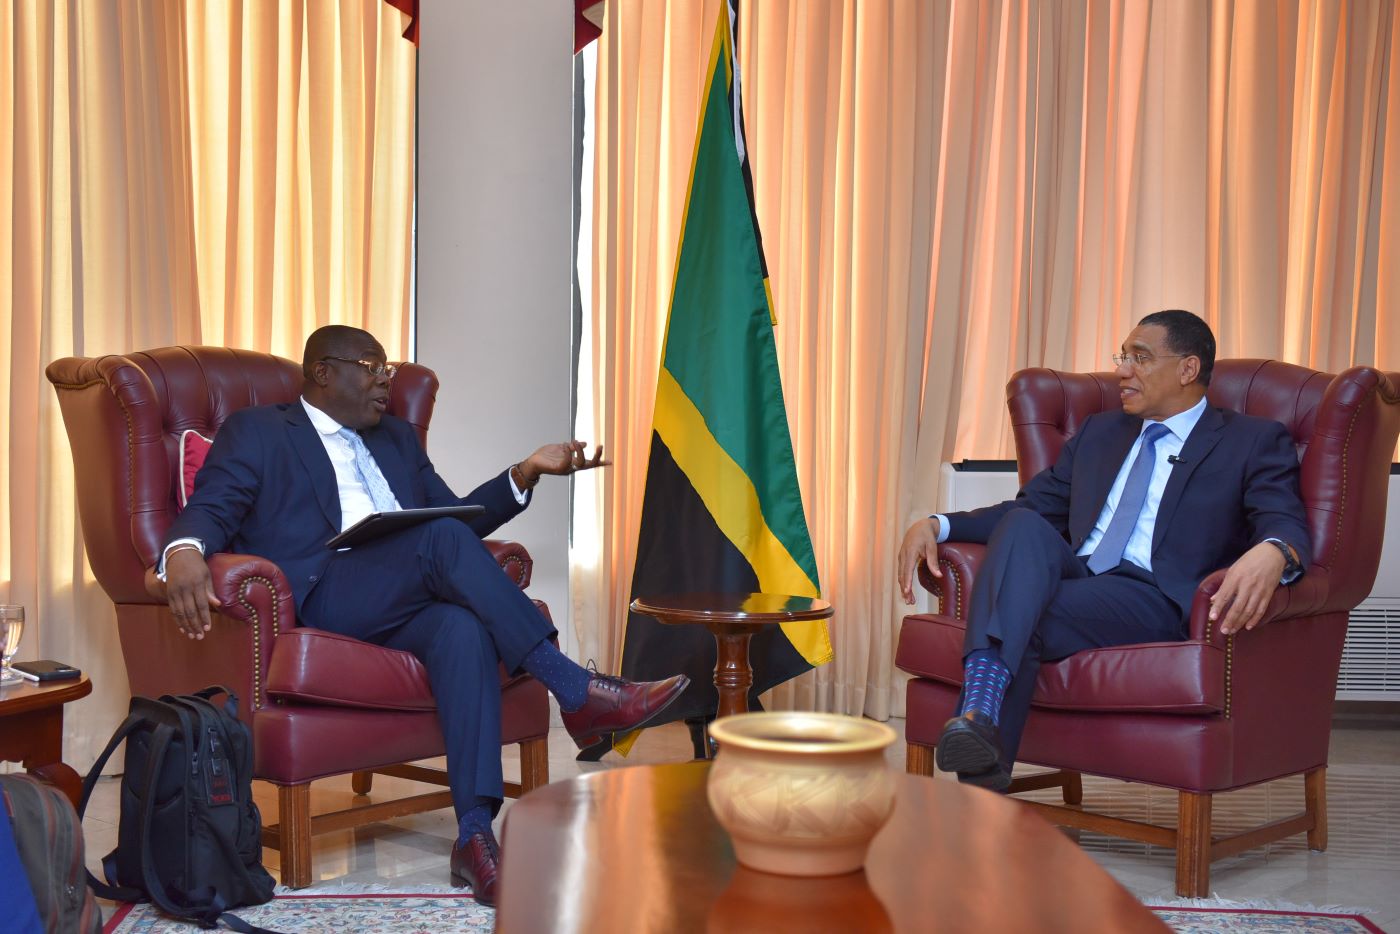 VPO Isaac Solomon and PM Andrew Holness